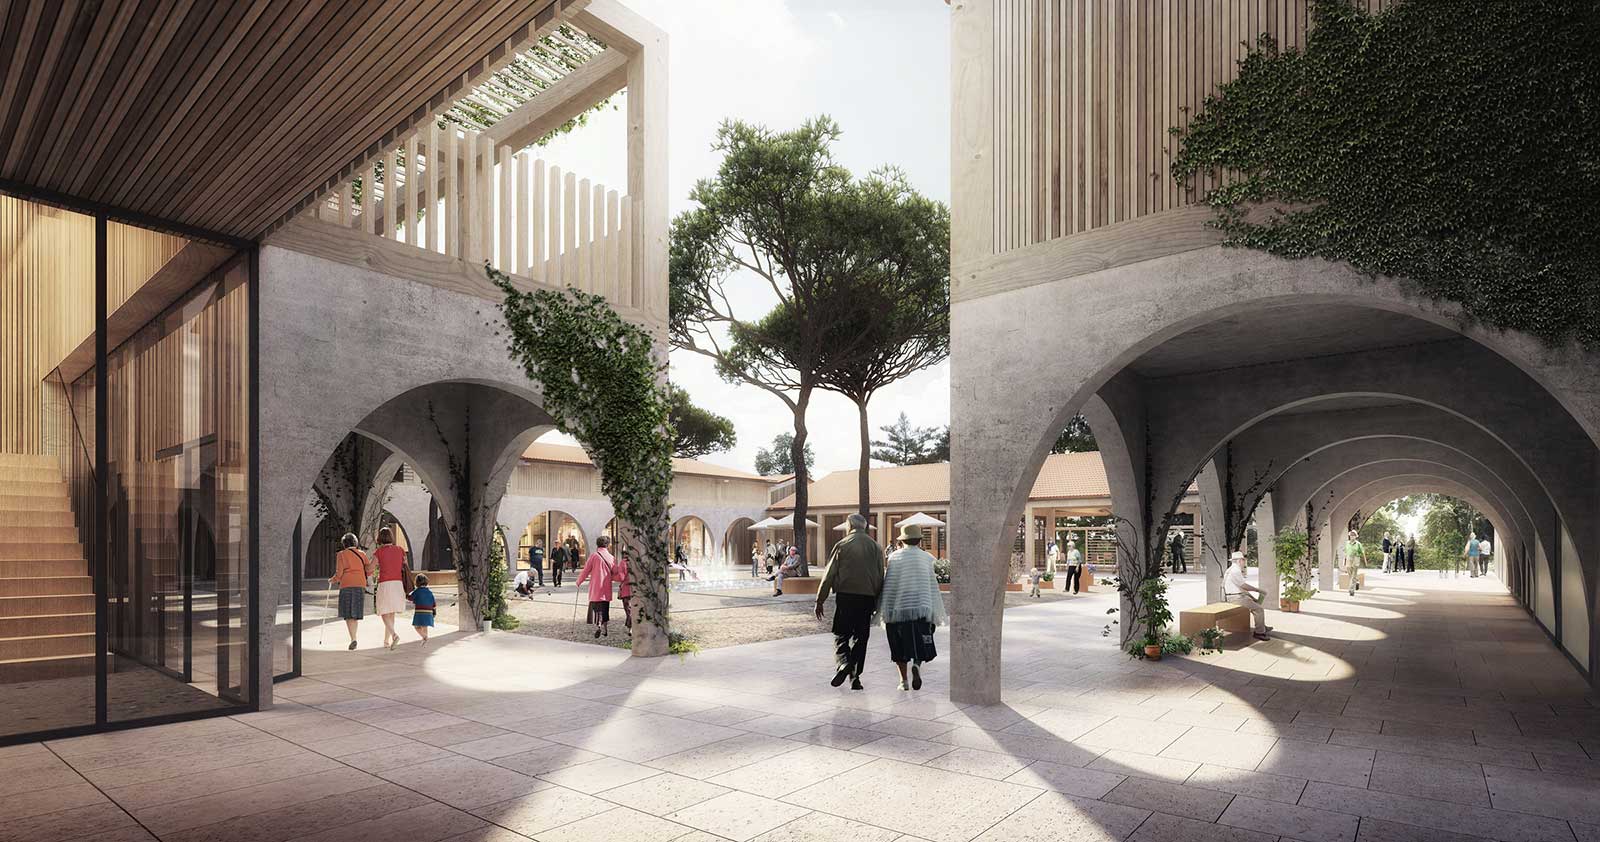 Alzheimers village in France designed by Nord Architects